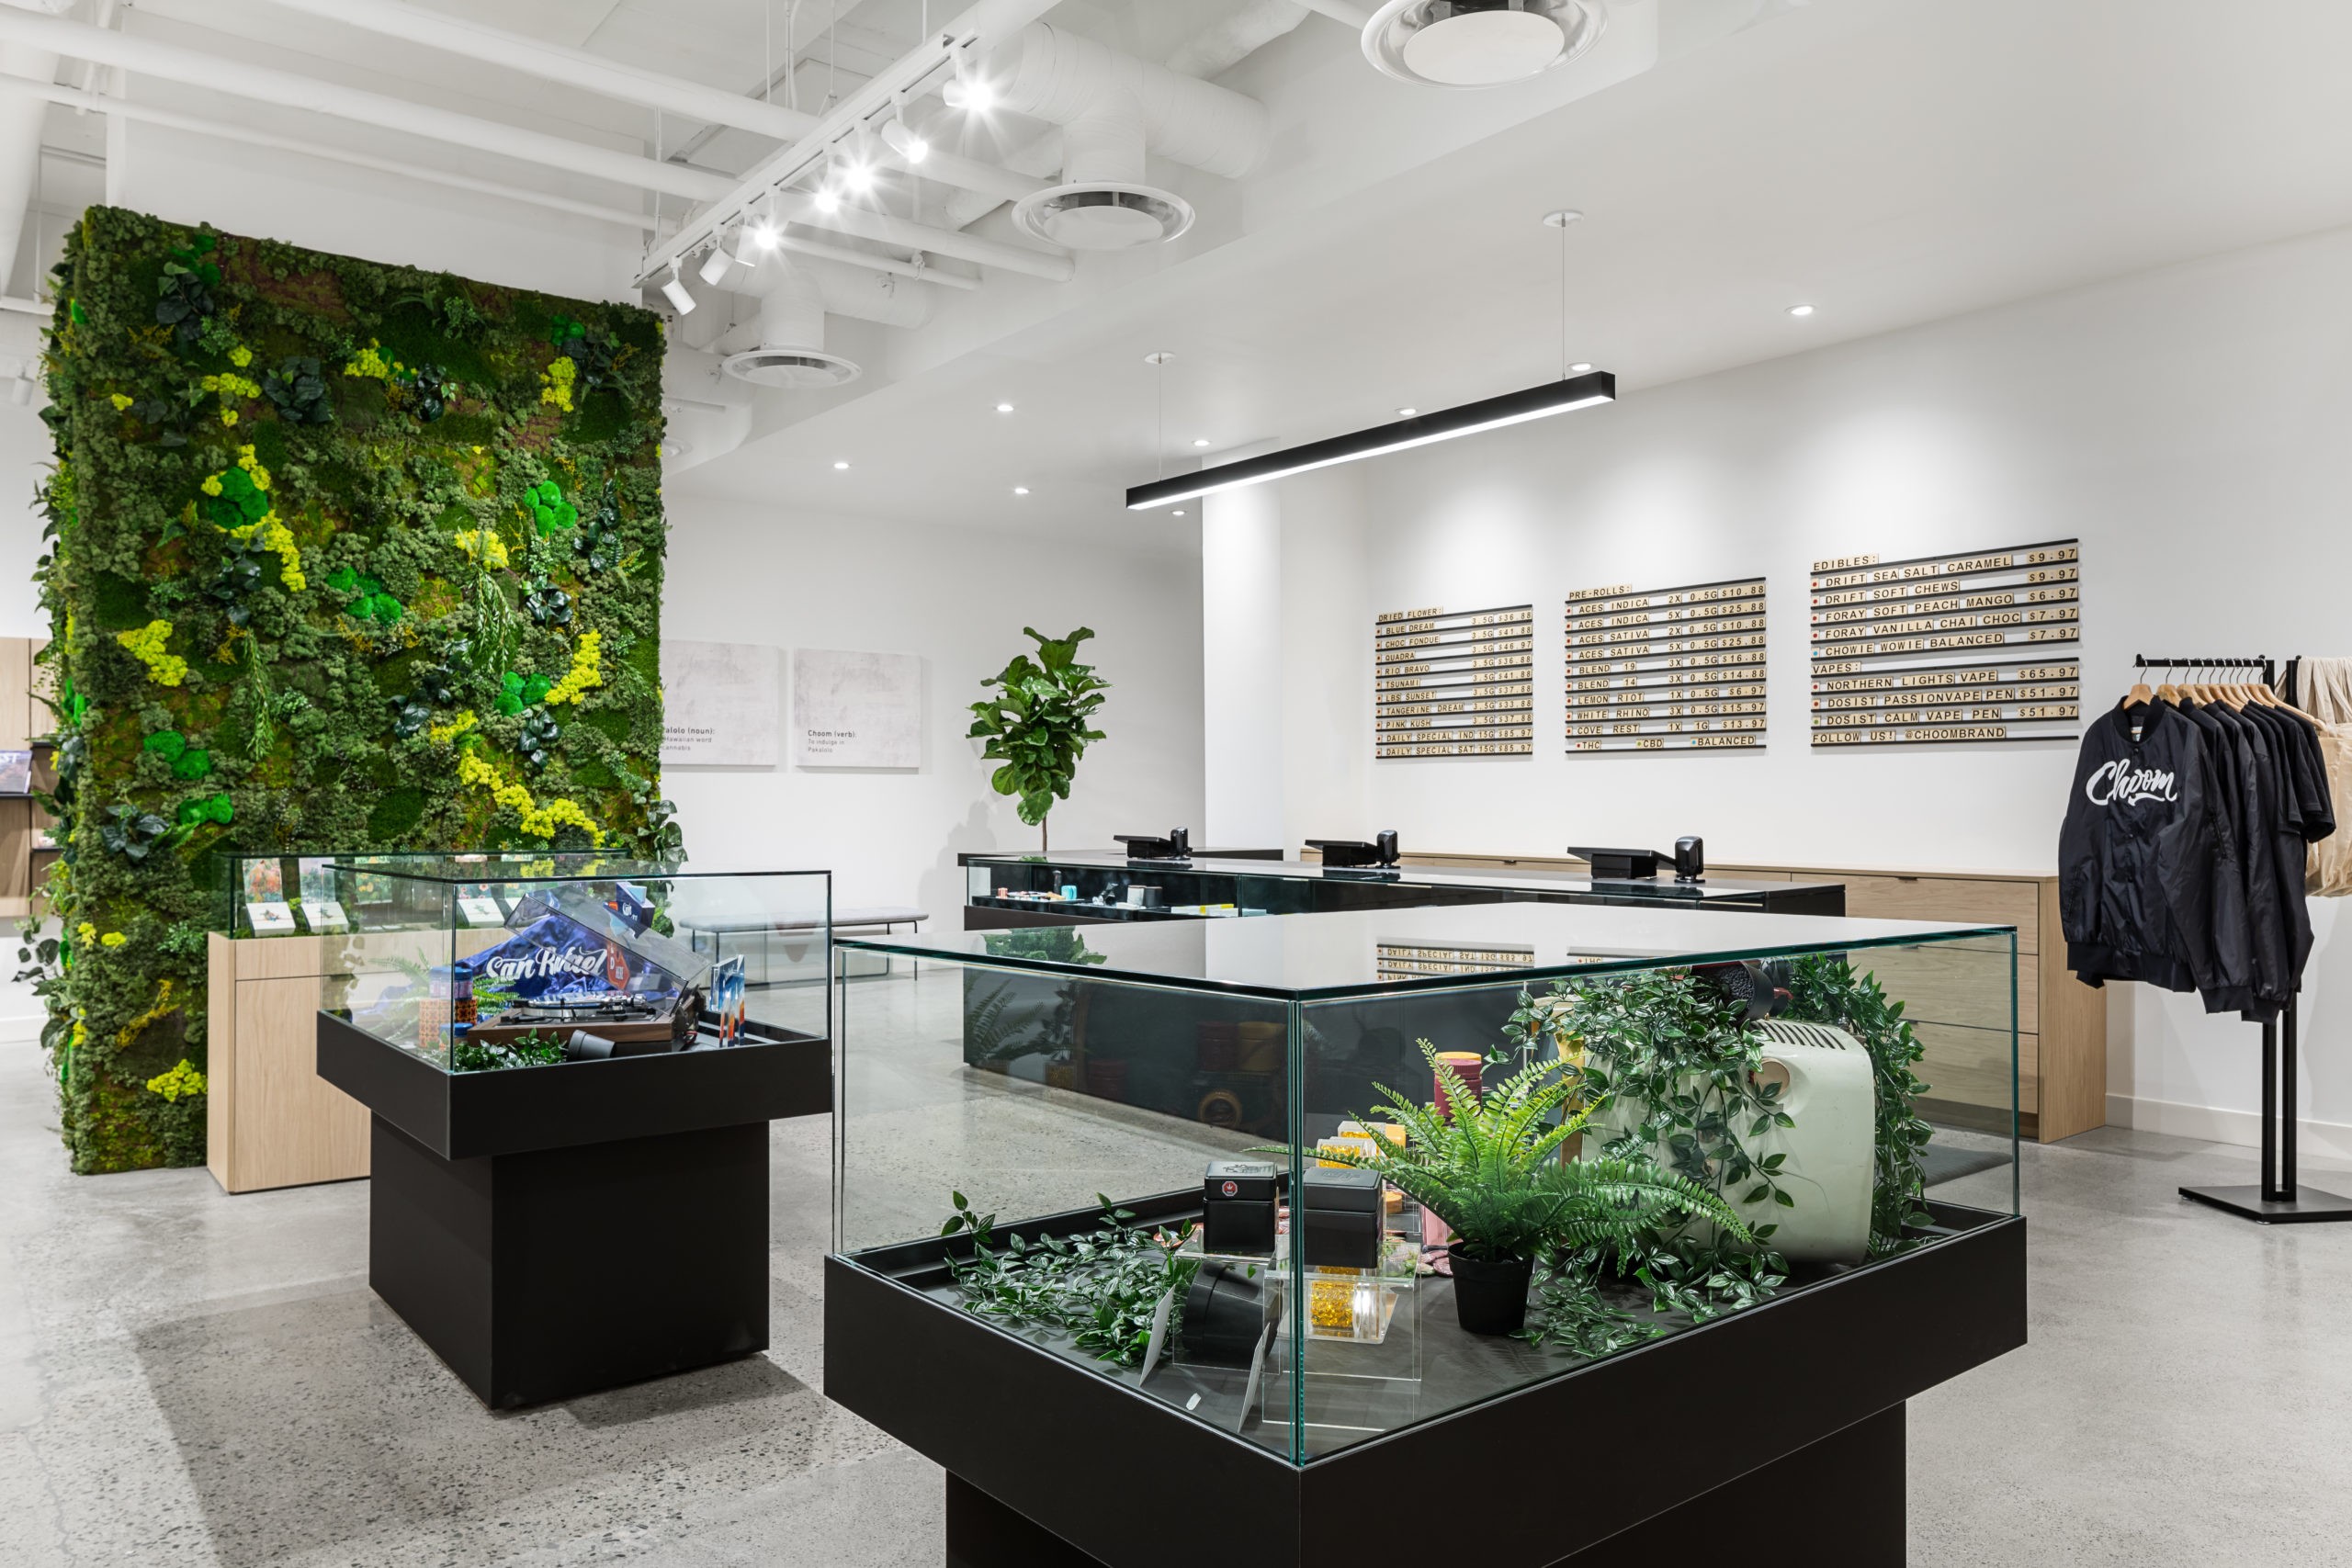 Choom Olympic Village in Vancouver BC Cannabis Retail Design & Architecture Lockable display cases by Cutler